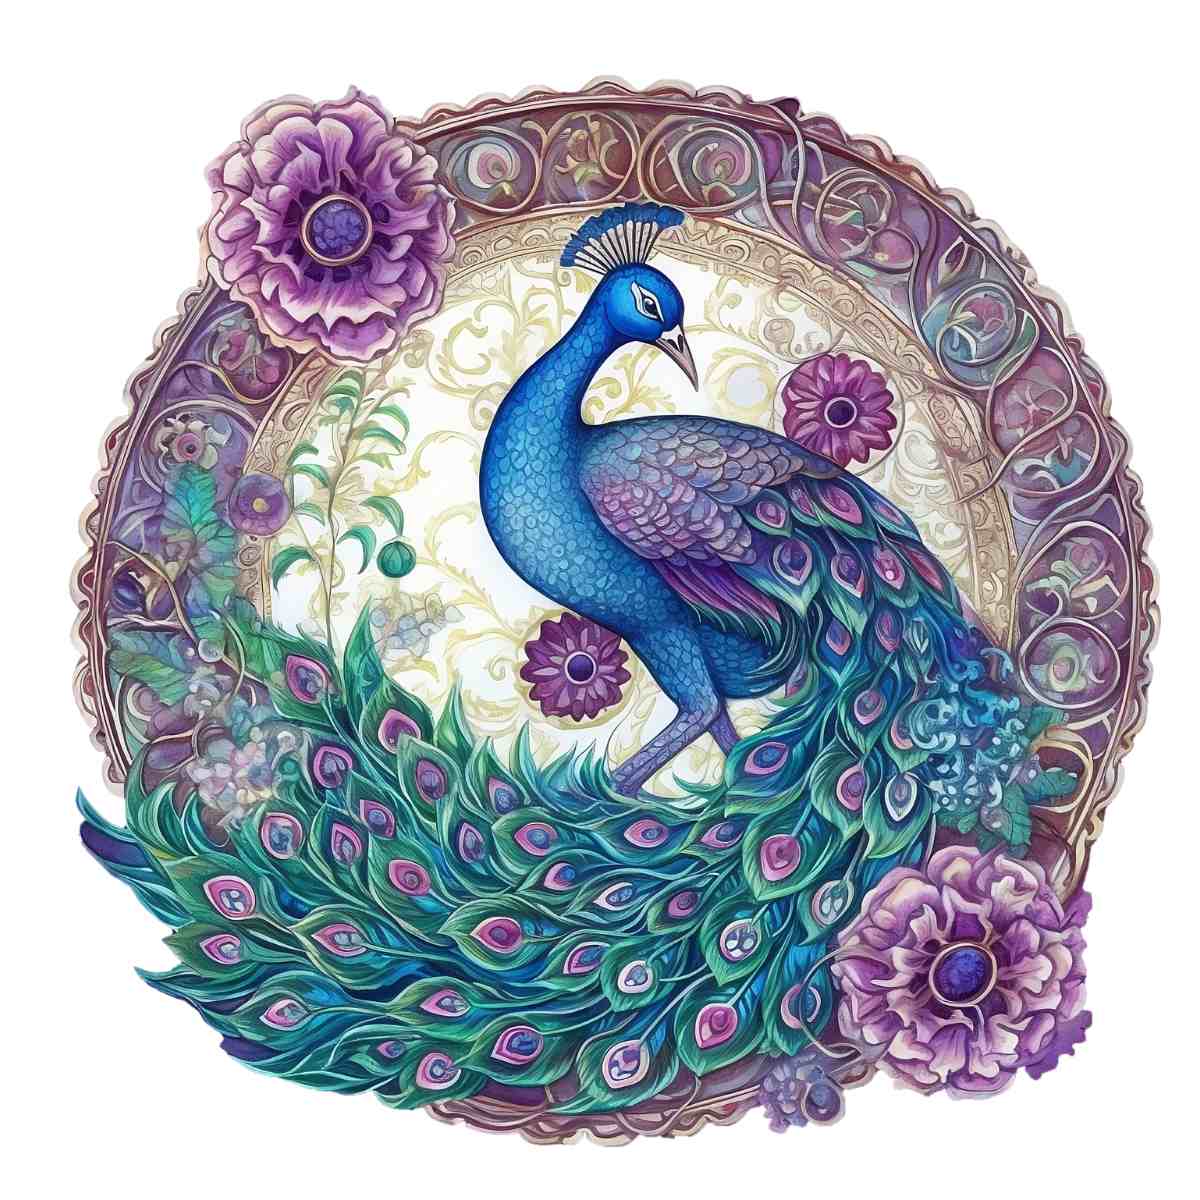 Enchanted Peacock - Wooden Jigsaw Puzzle - PuzzlesUp